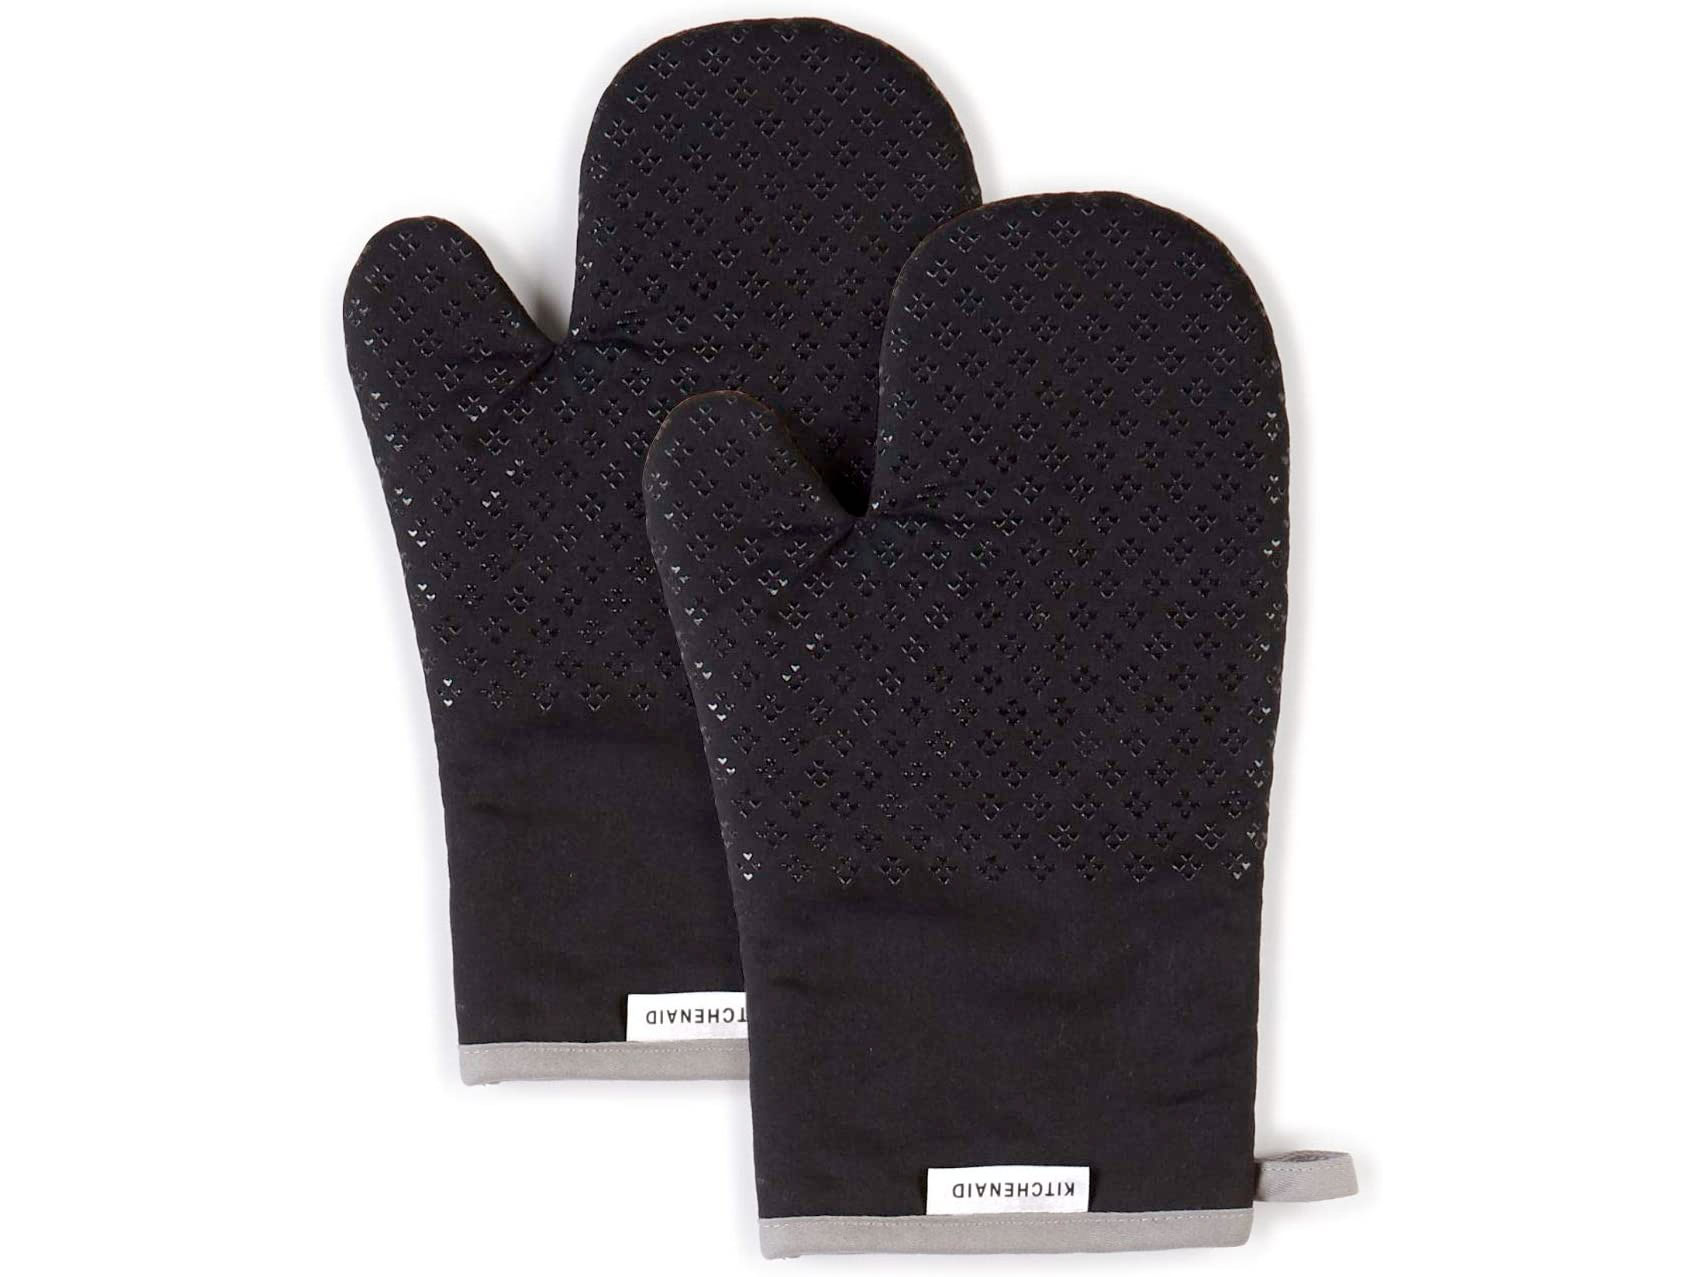 Amazon：KitchenAid Asteroid Cotton Oven Mitts with Silicone Grip (Set of 2)只卖$9.99